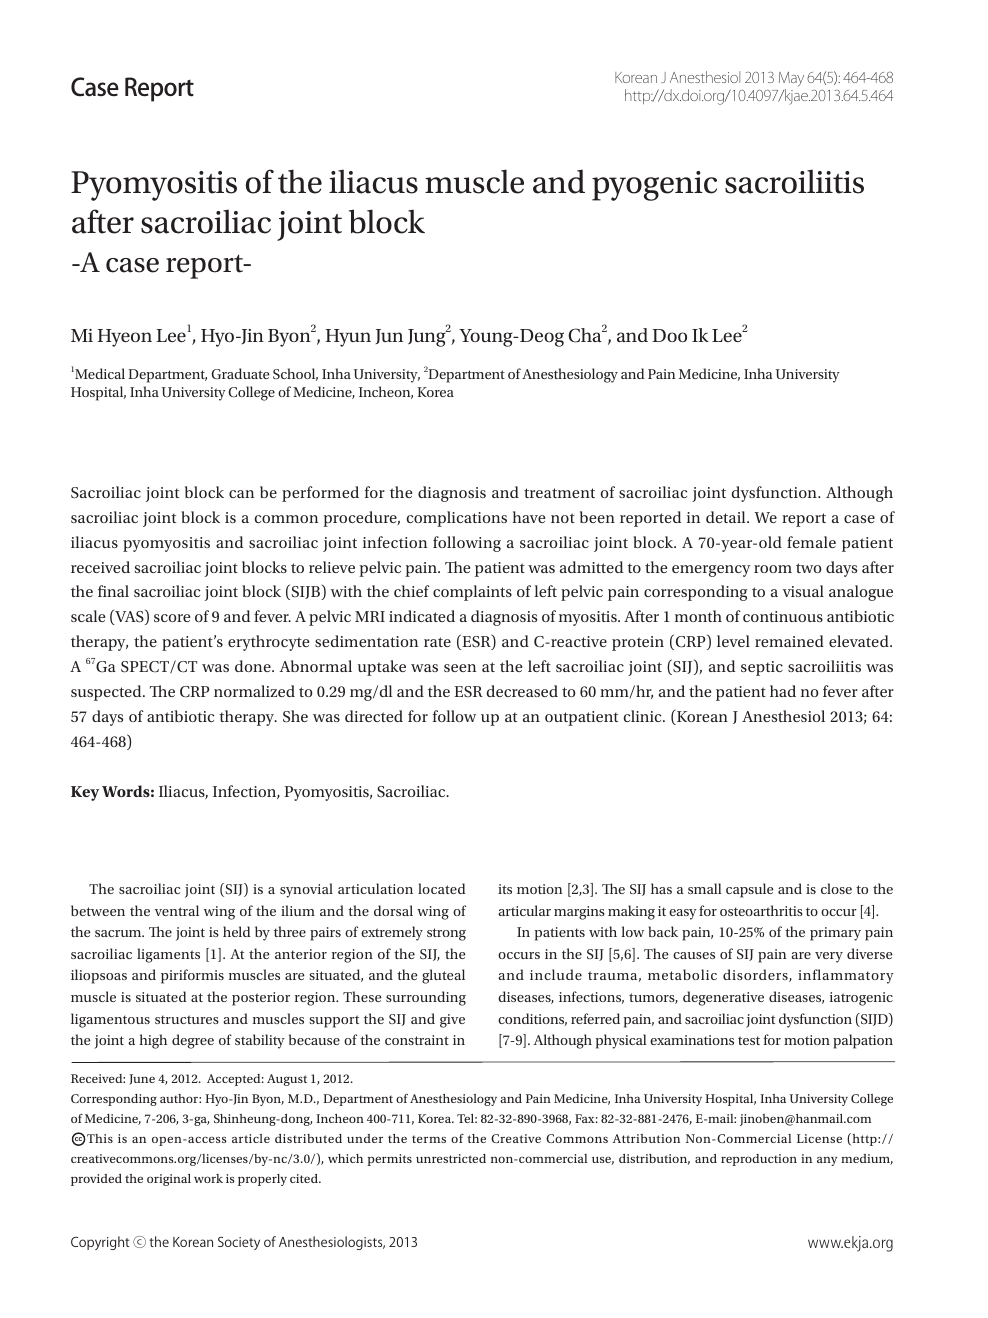 Pyomyositis Of The Iliacus Muscle And Pyogenic Sacroiliitis After Sacroiliac Joint Block A Case Report Topic Of Research Paper In Clinical Medicine Download Scholarly Article Pdf And Read For Free On